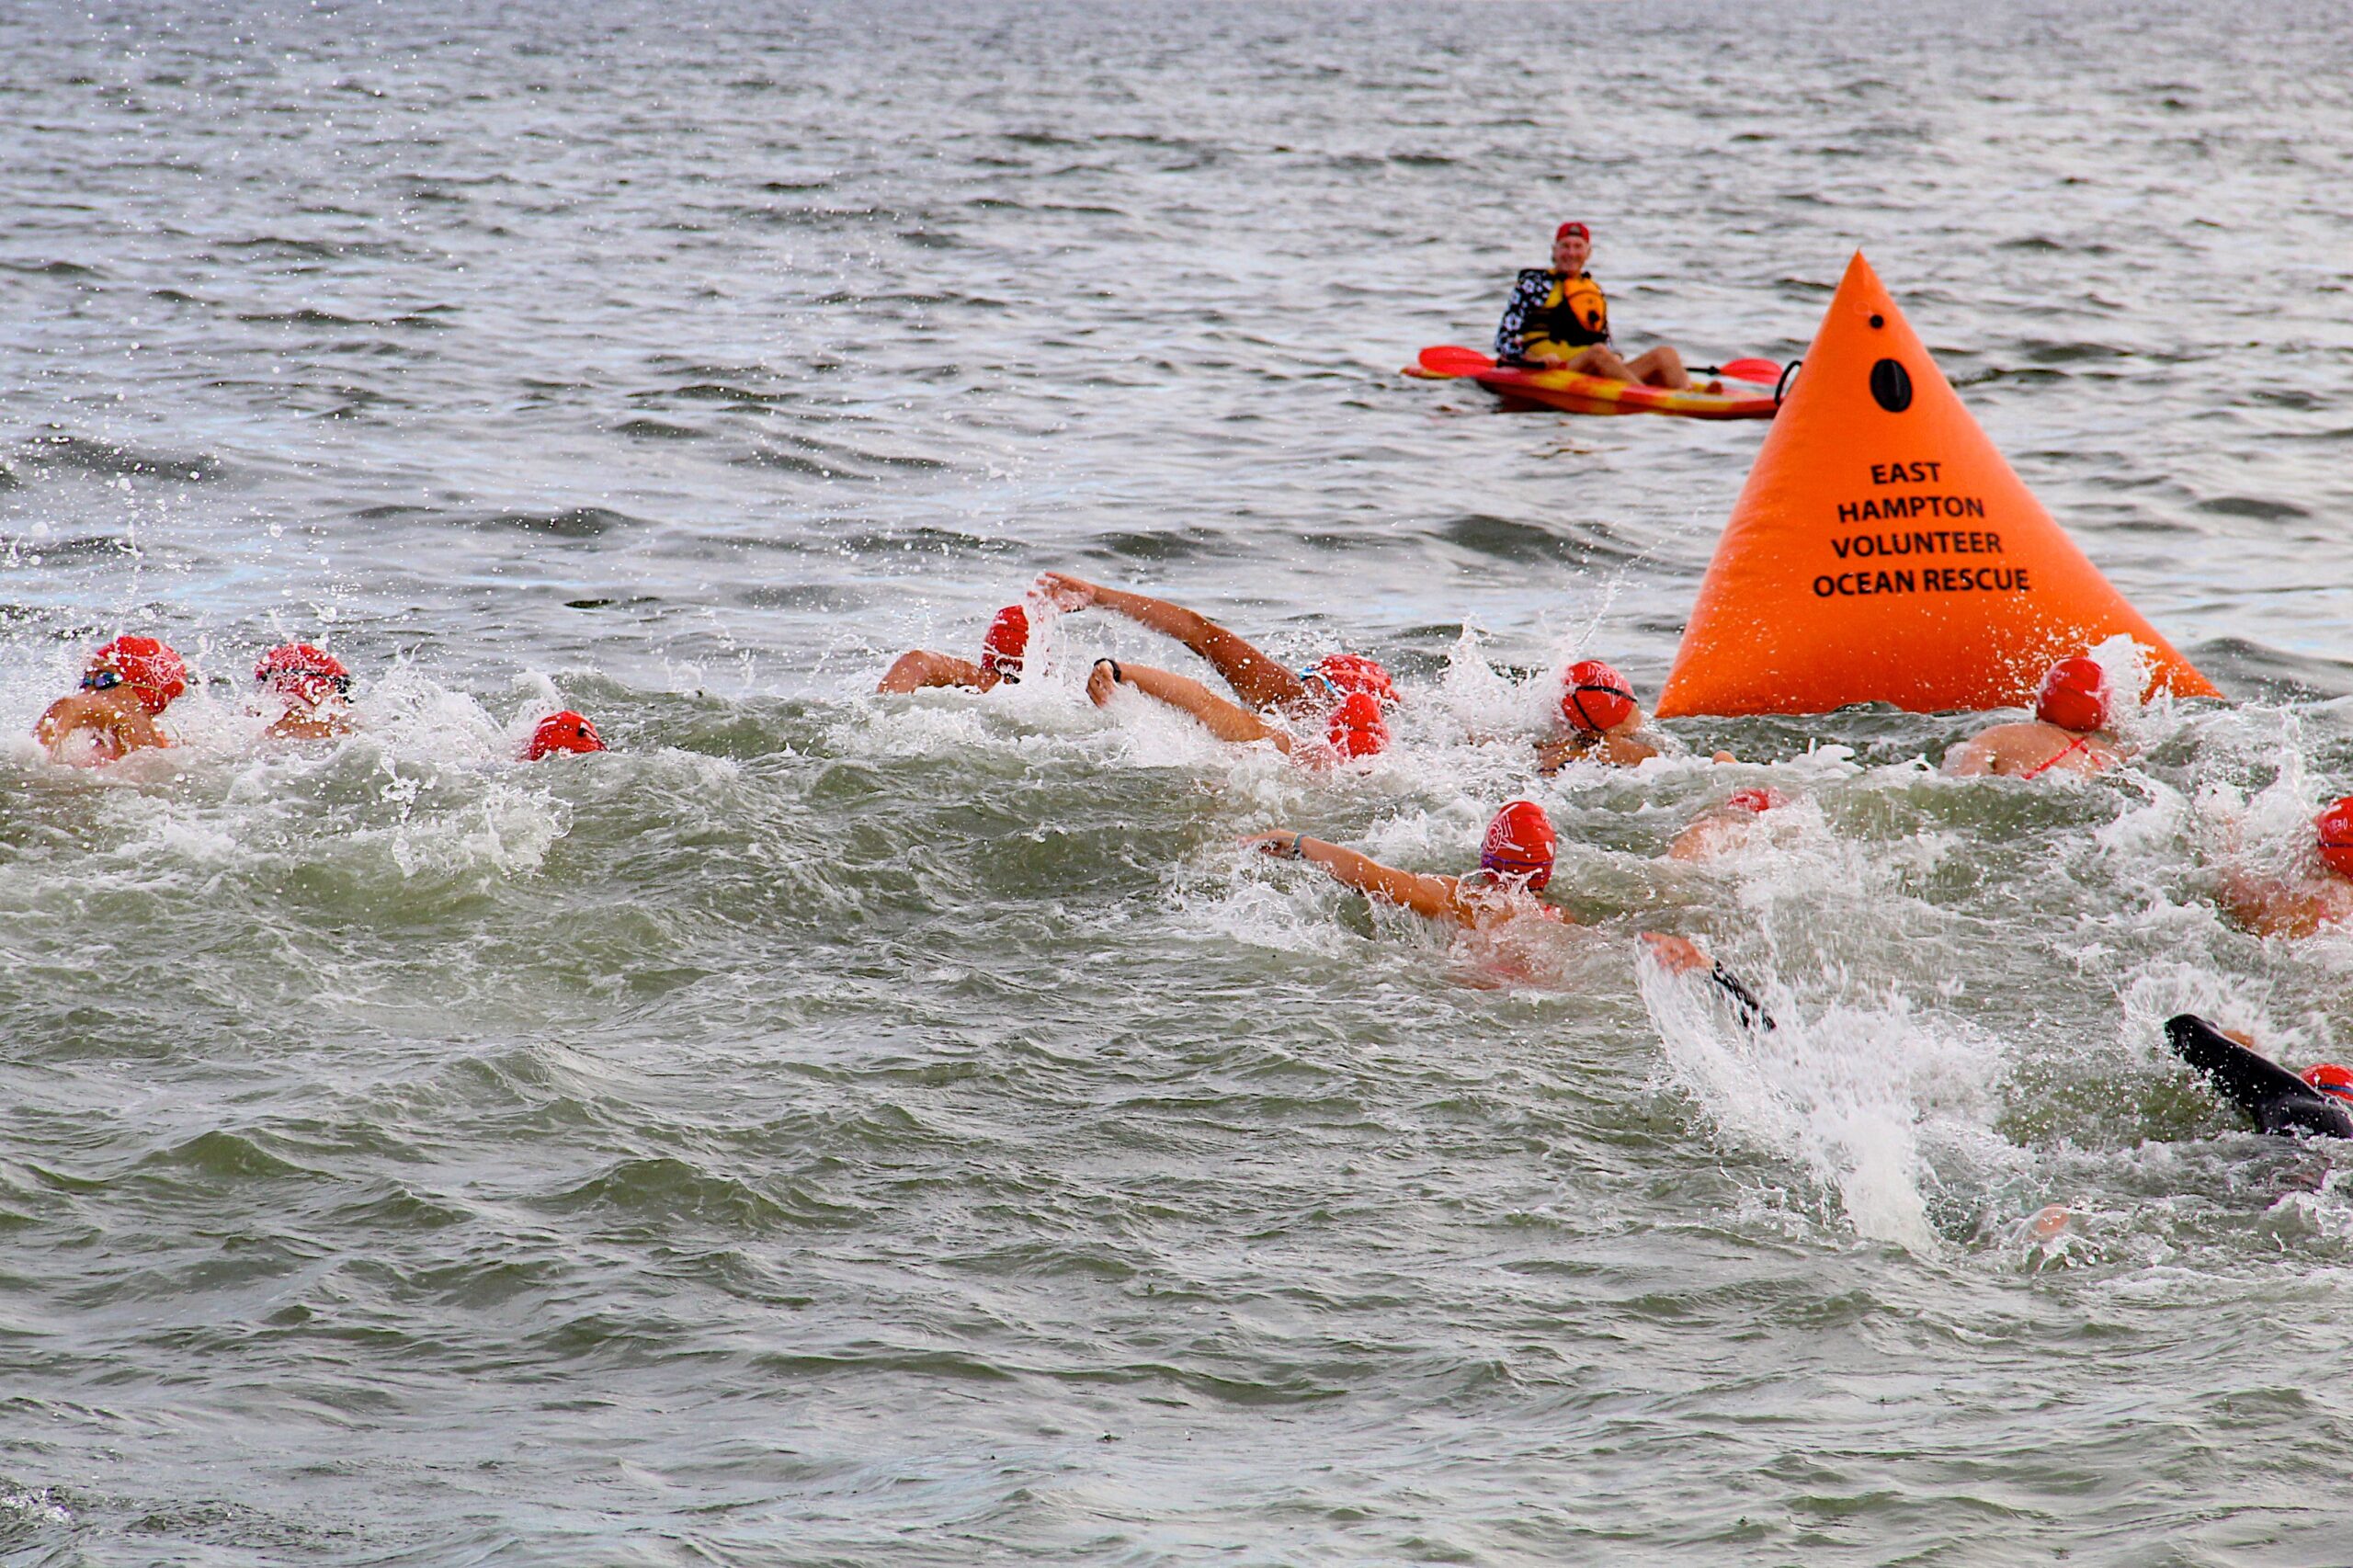 The Red Devil Swim, Which Supports East Hampton Volunteer Ocean Rescue,  Sees Its Best Turnout Yet - 27 East